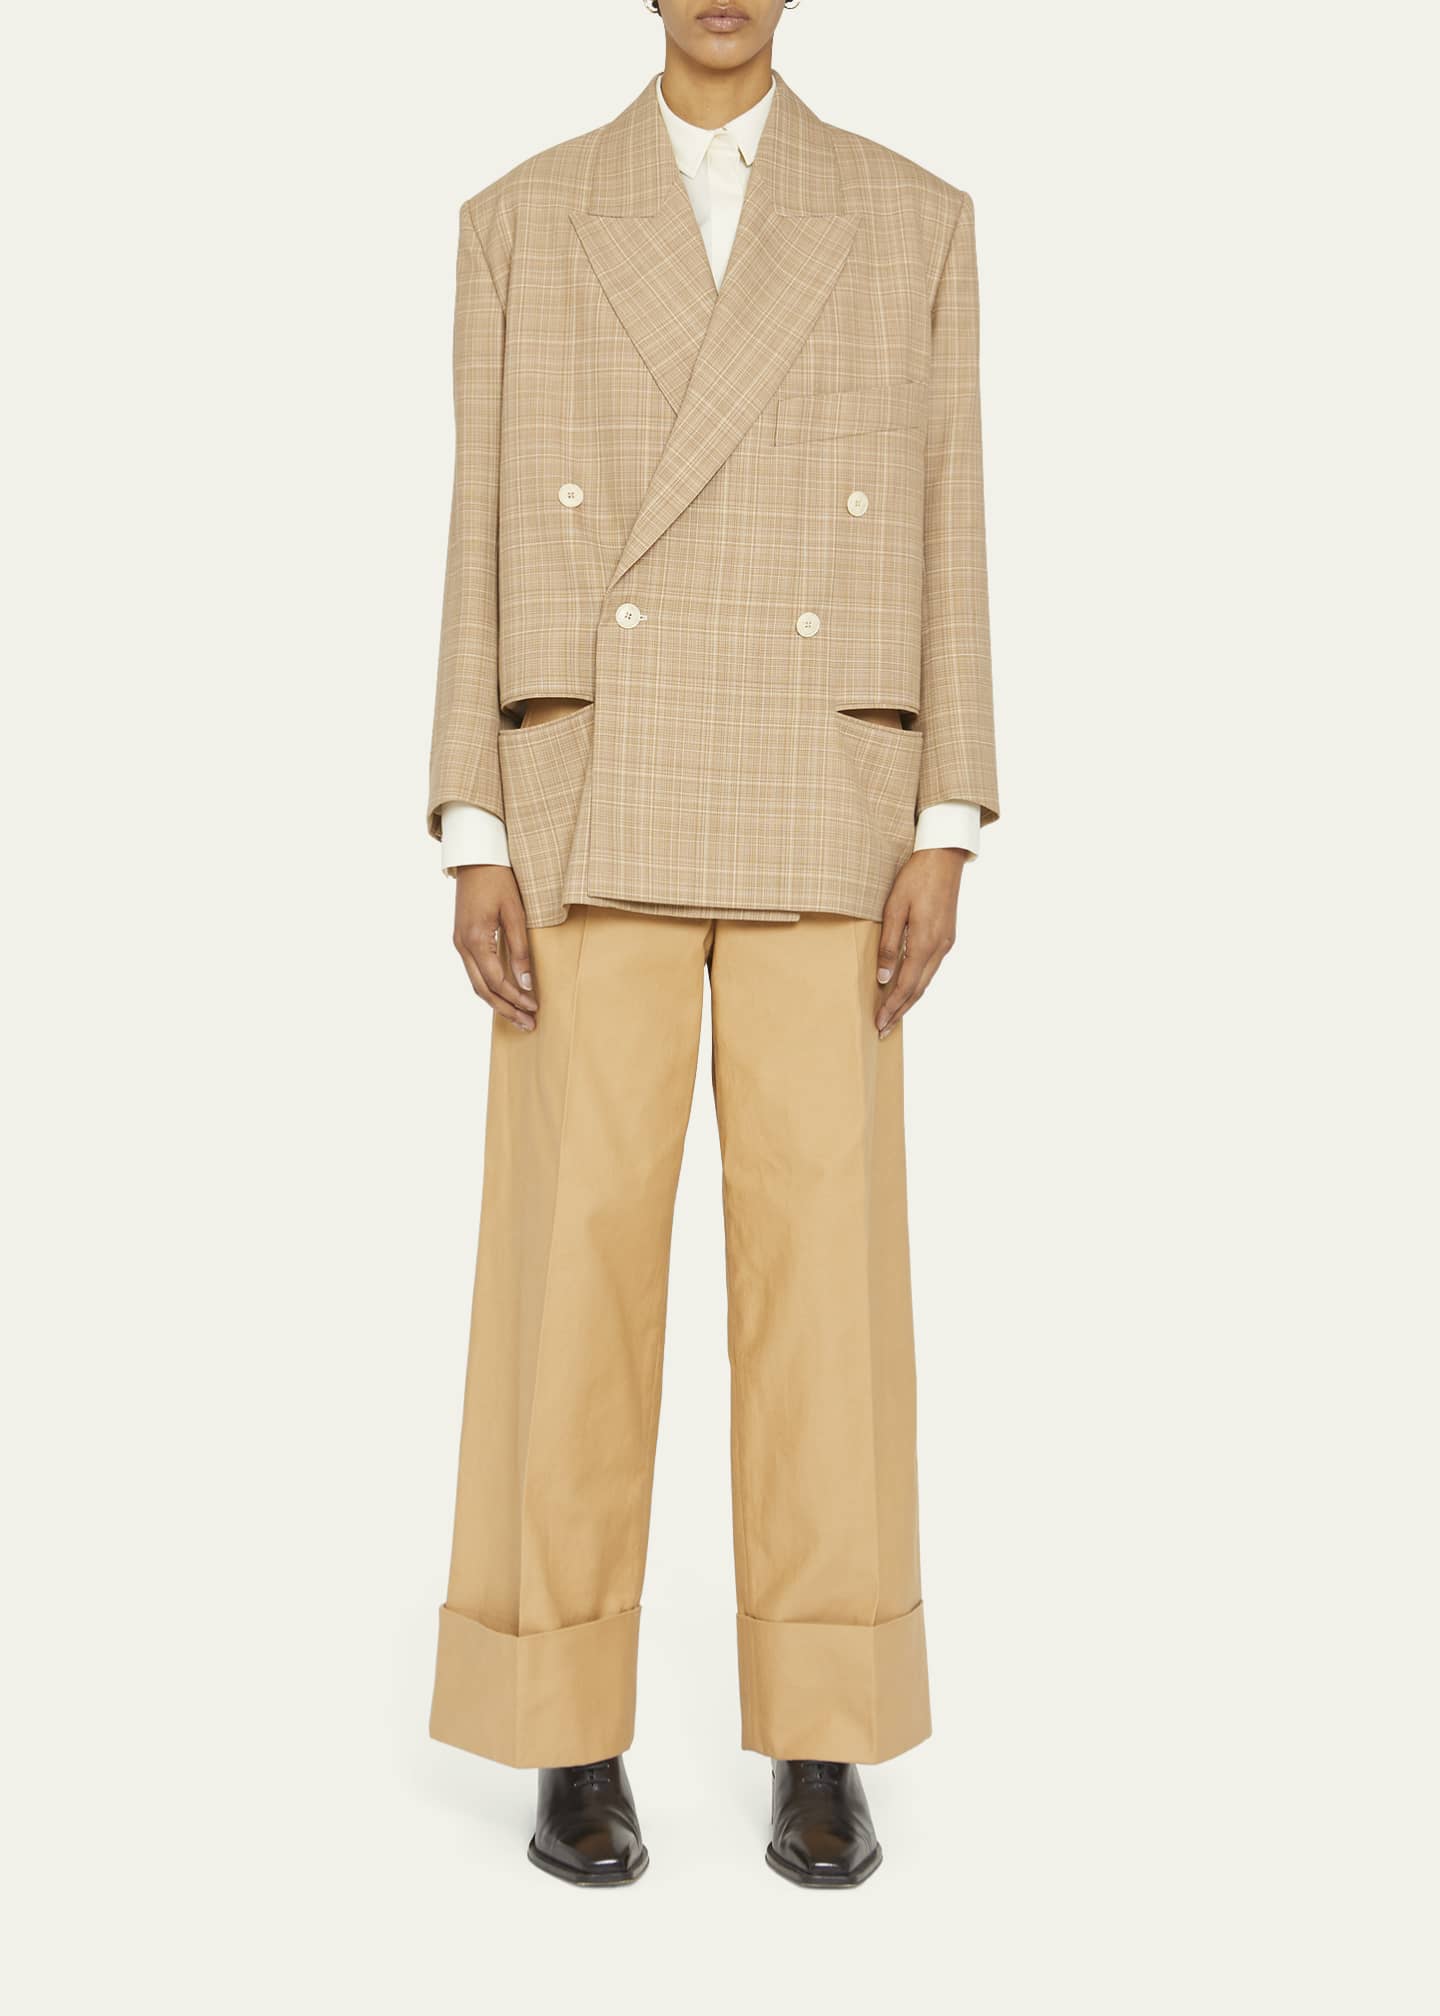 Quira Plaid Double-Breasted Wool Tailored Blazer - Bergdorf Goodman